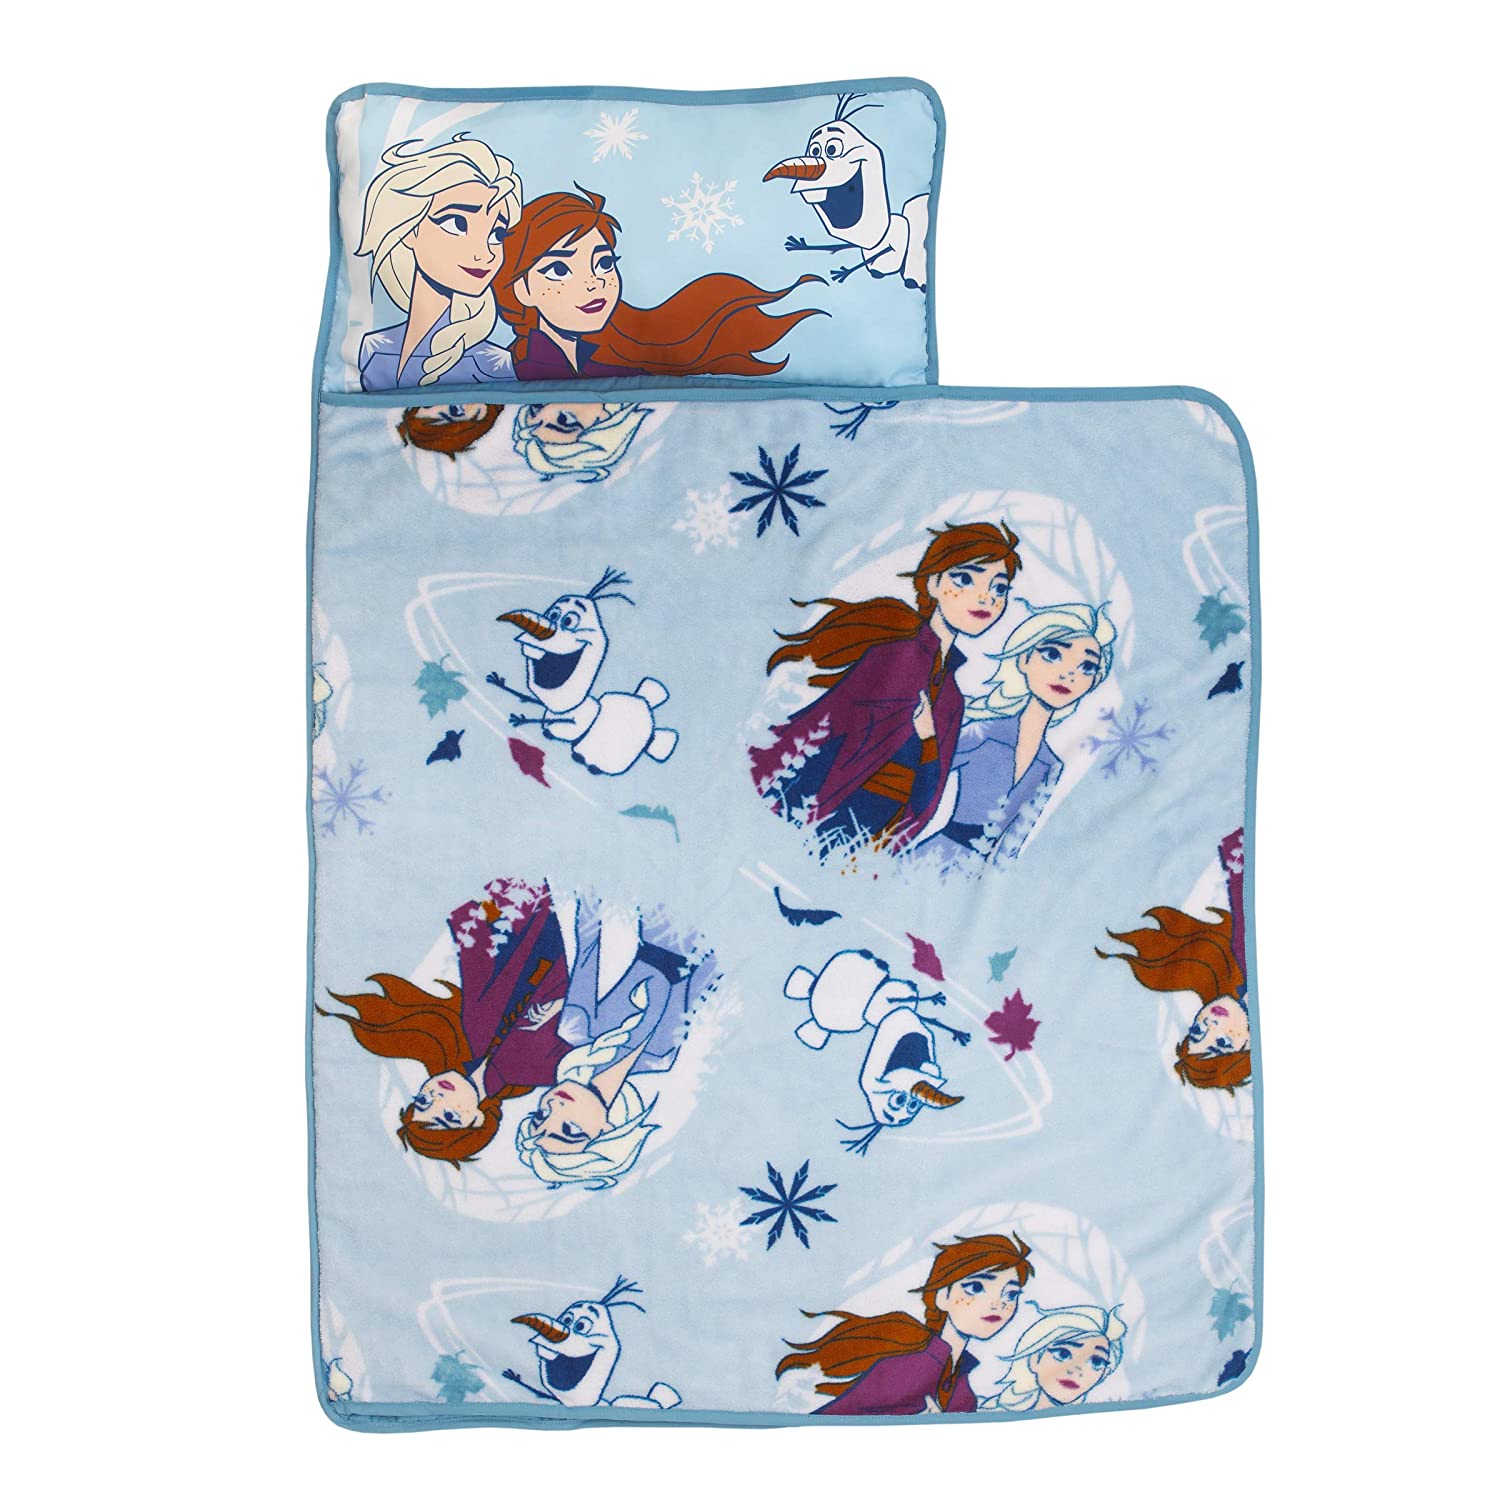 Disney Frozen 2 Spirit of Nature Padded Nap Mat, Blue, Purple, Yellow - with Built in Pillow, Blanket & Name Label